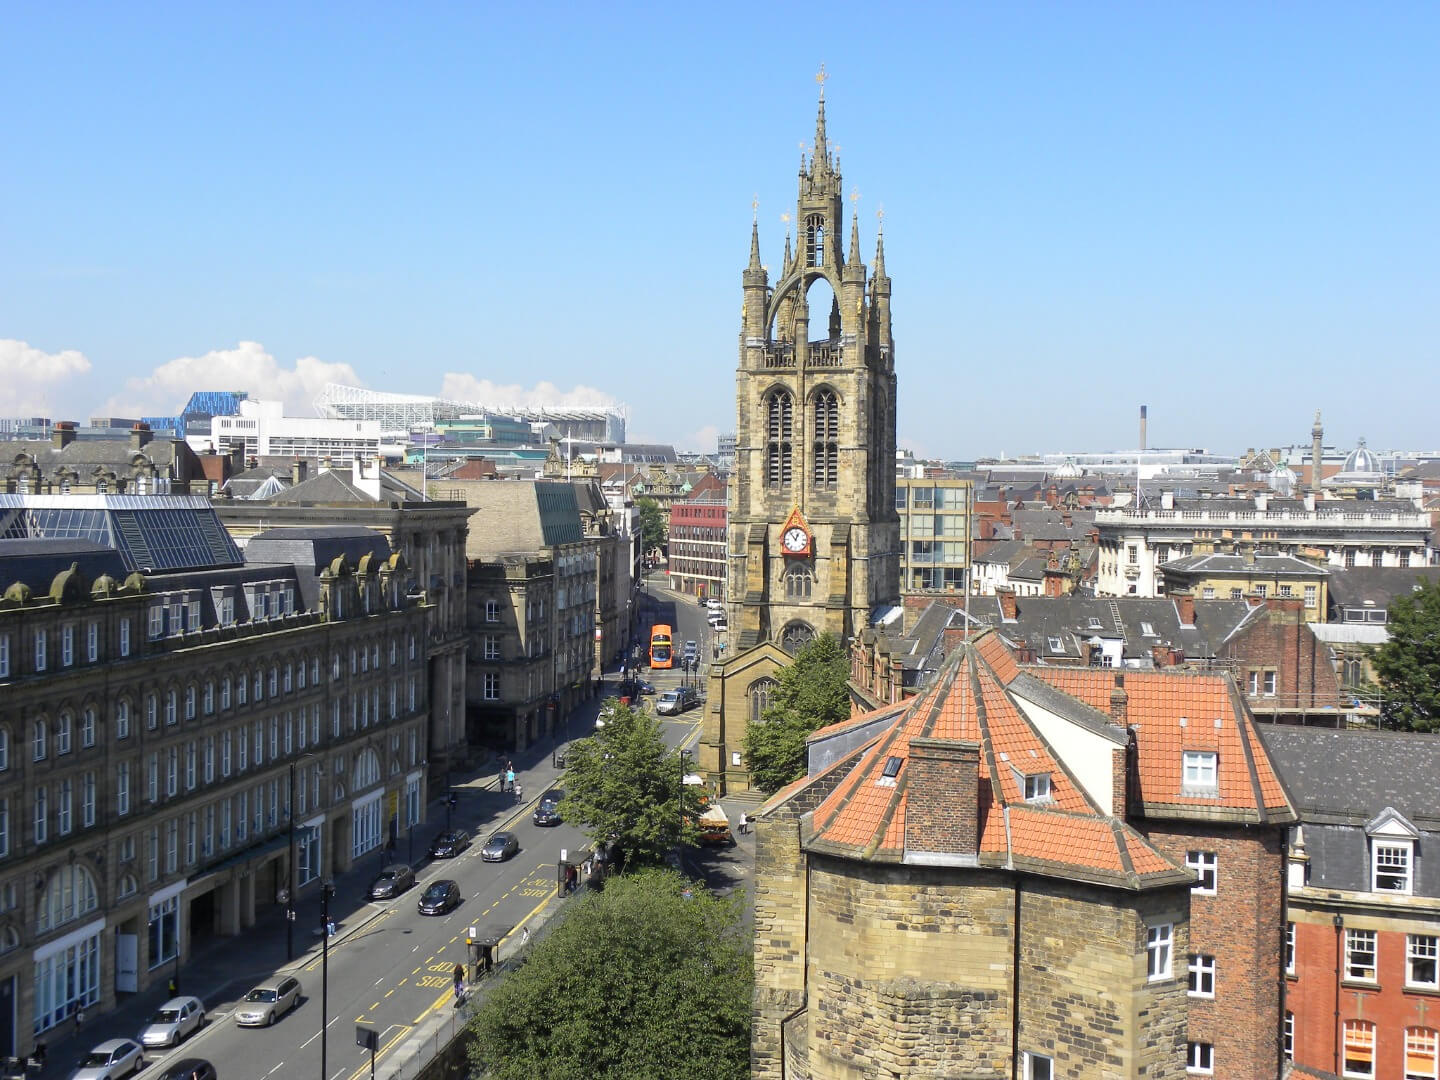 Student Accommodation in Newcastle City Centre, Newcastle - Newcastle Cathedral and surrounding buildings